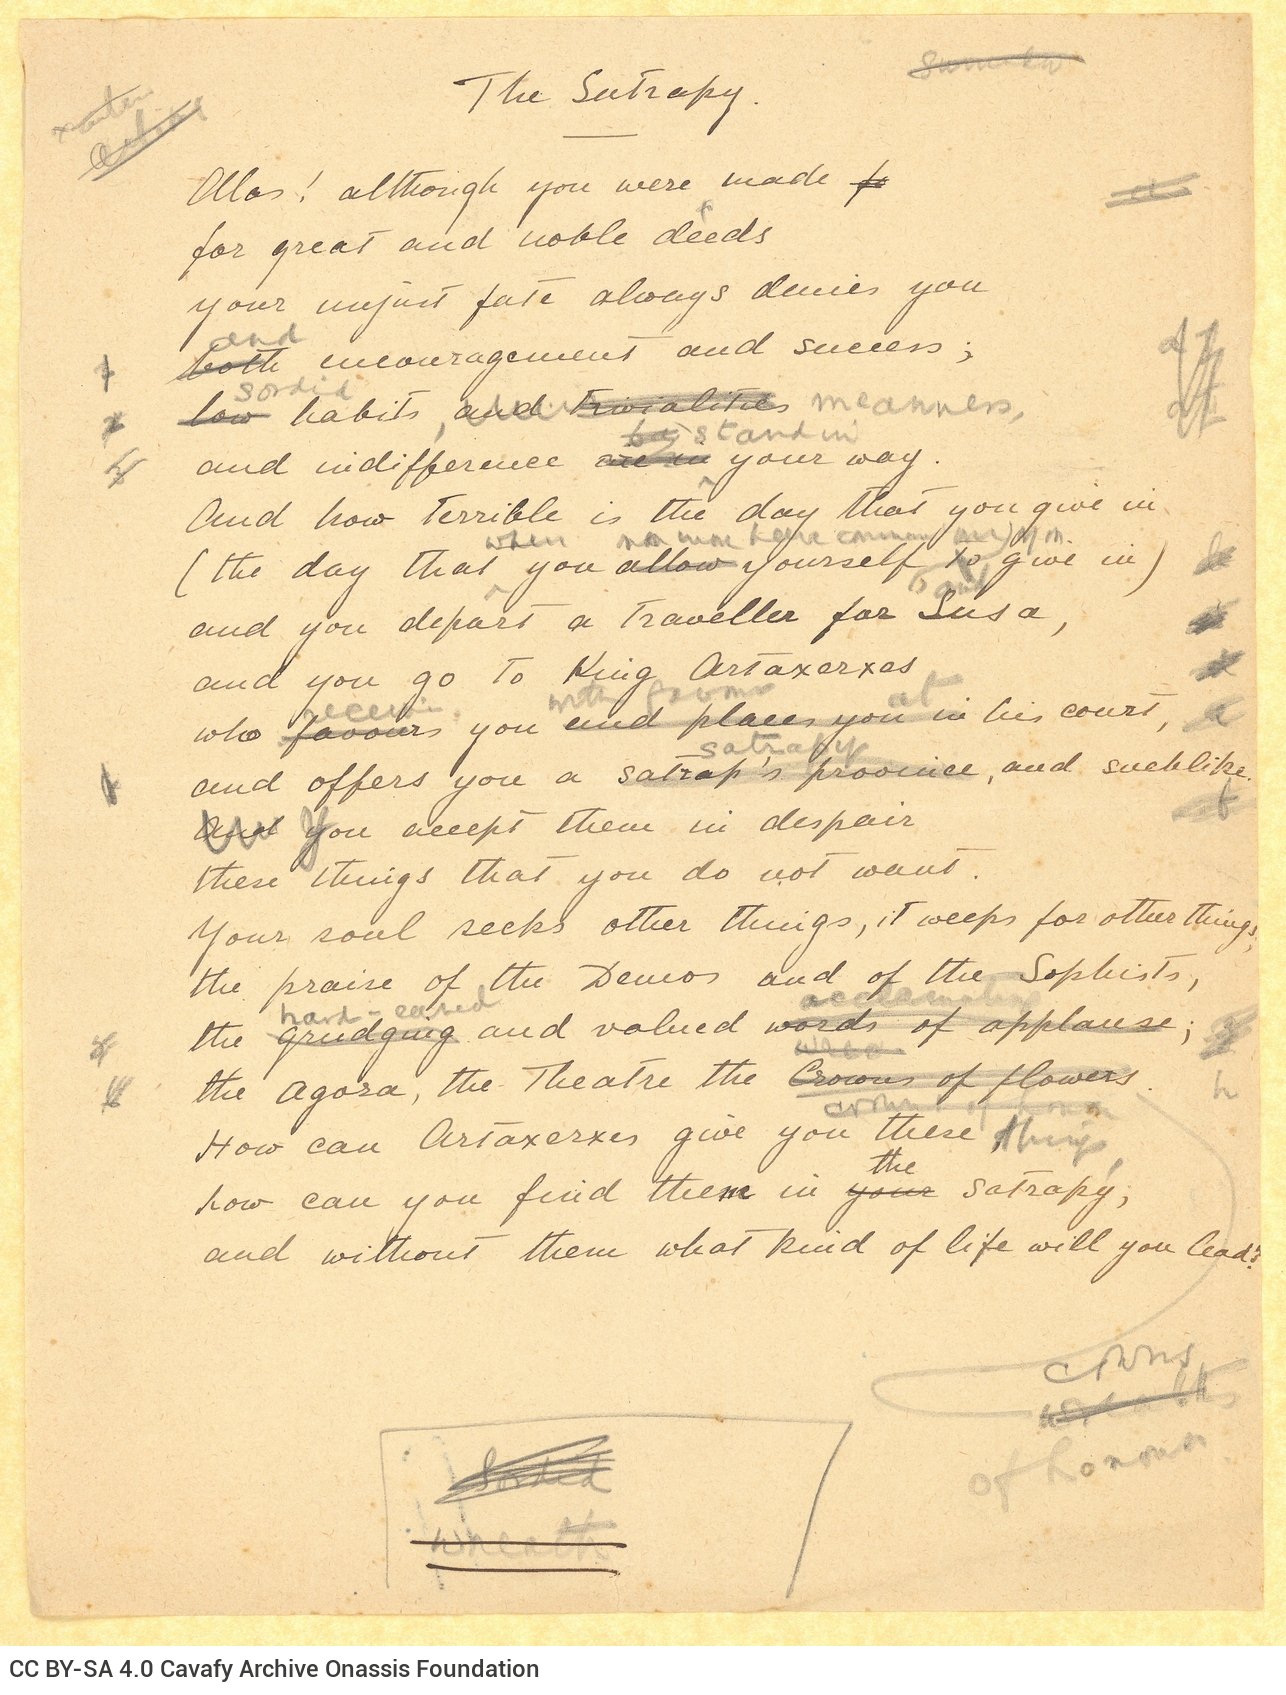 Handwritten English translation of the poem "The Satrapy" by G. Valassopoulo on one side of a sheet; cancellations and eme